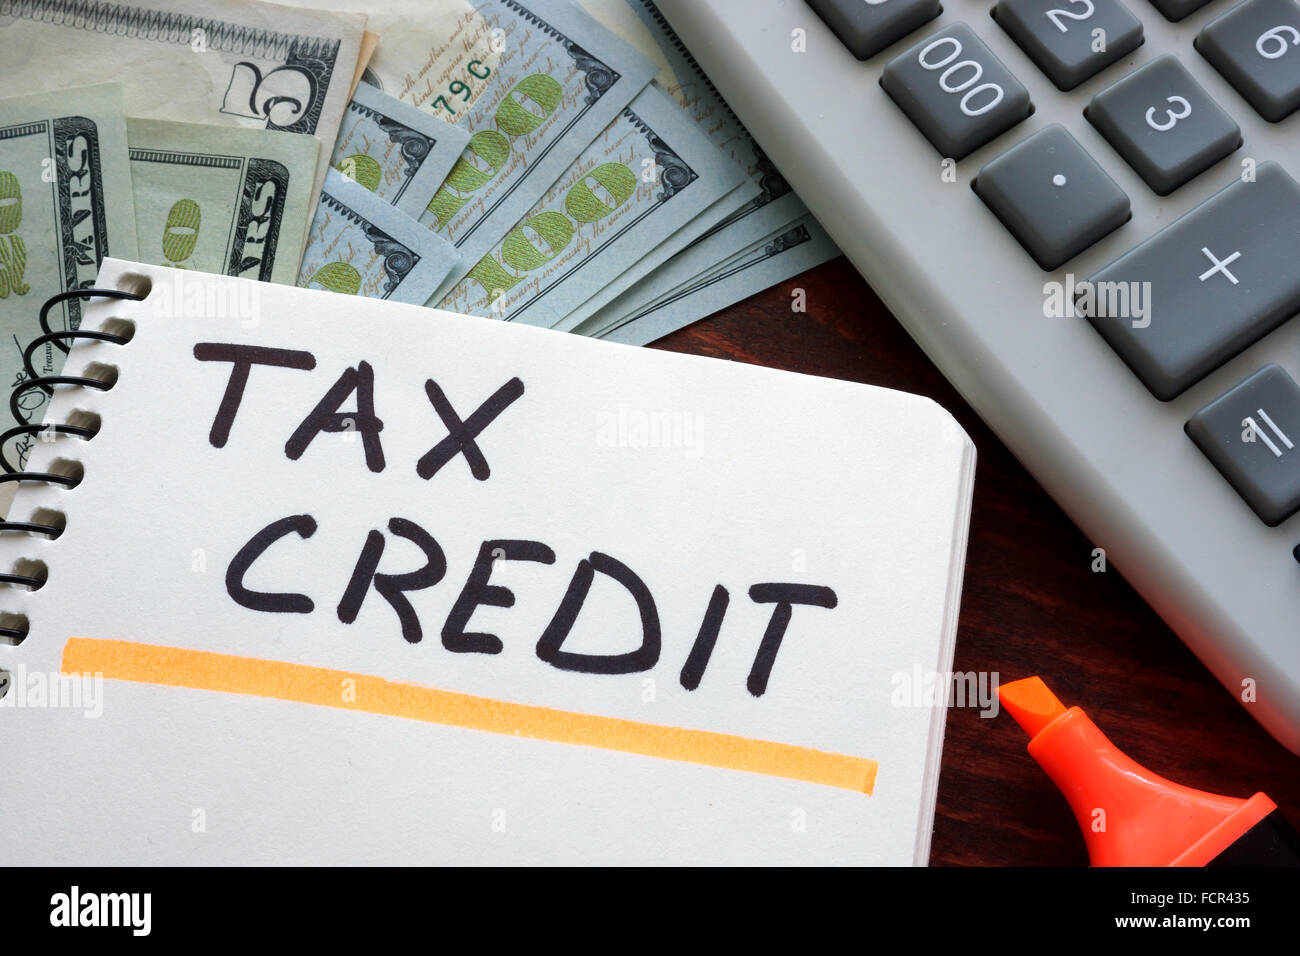 Notebook with  tax credit sign on a table. Business concept. Stock Photo